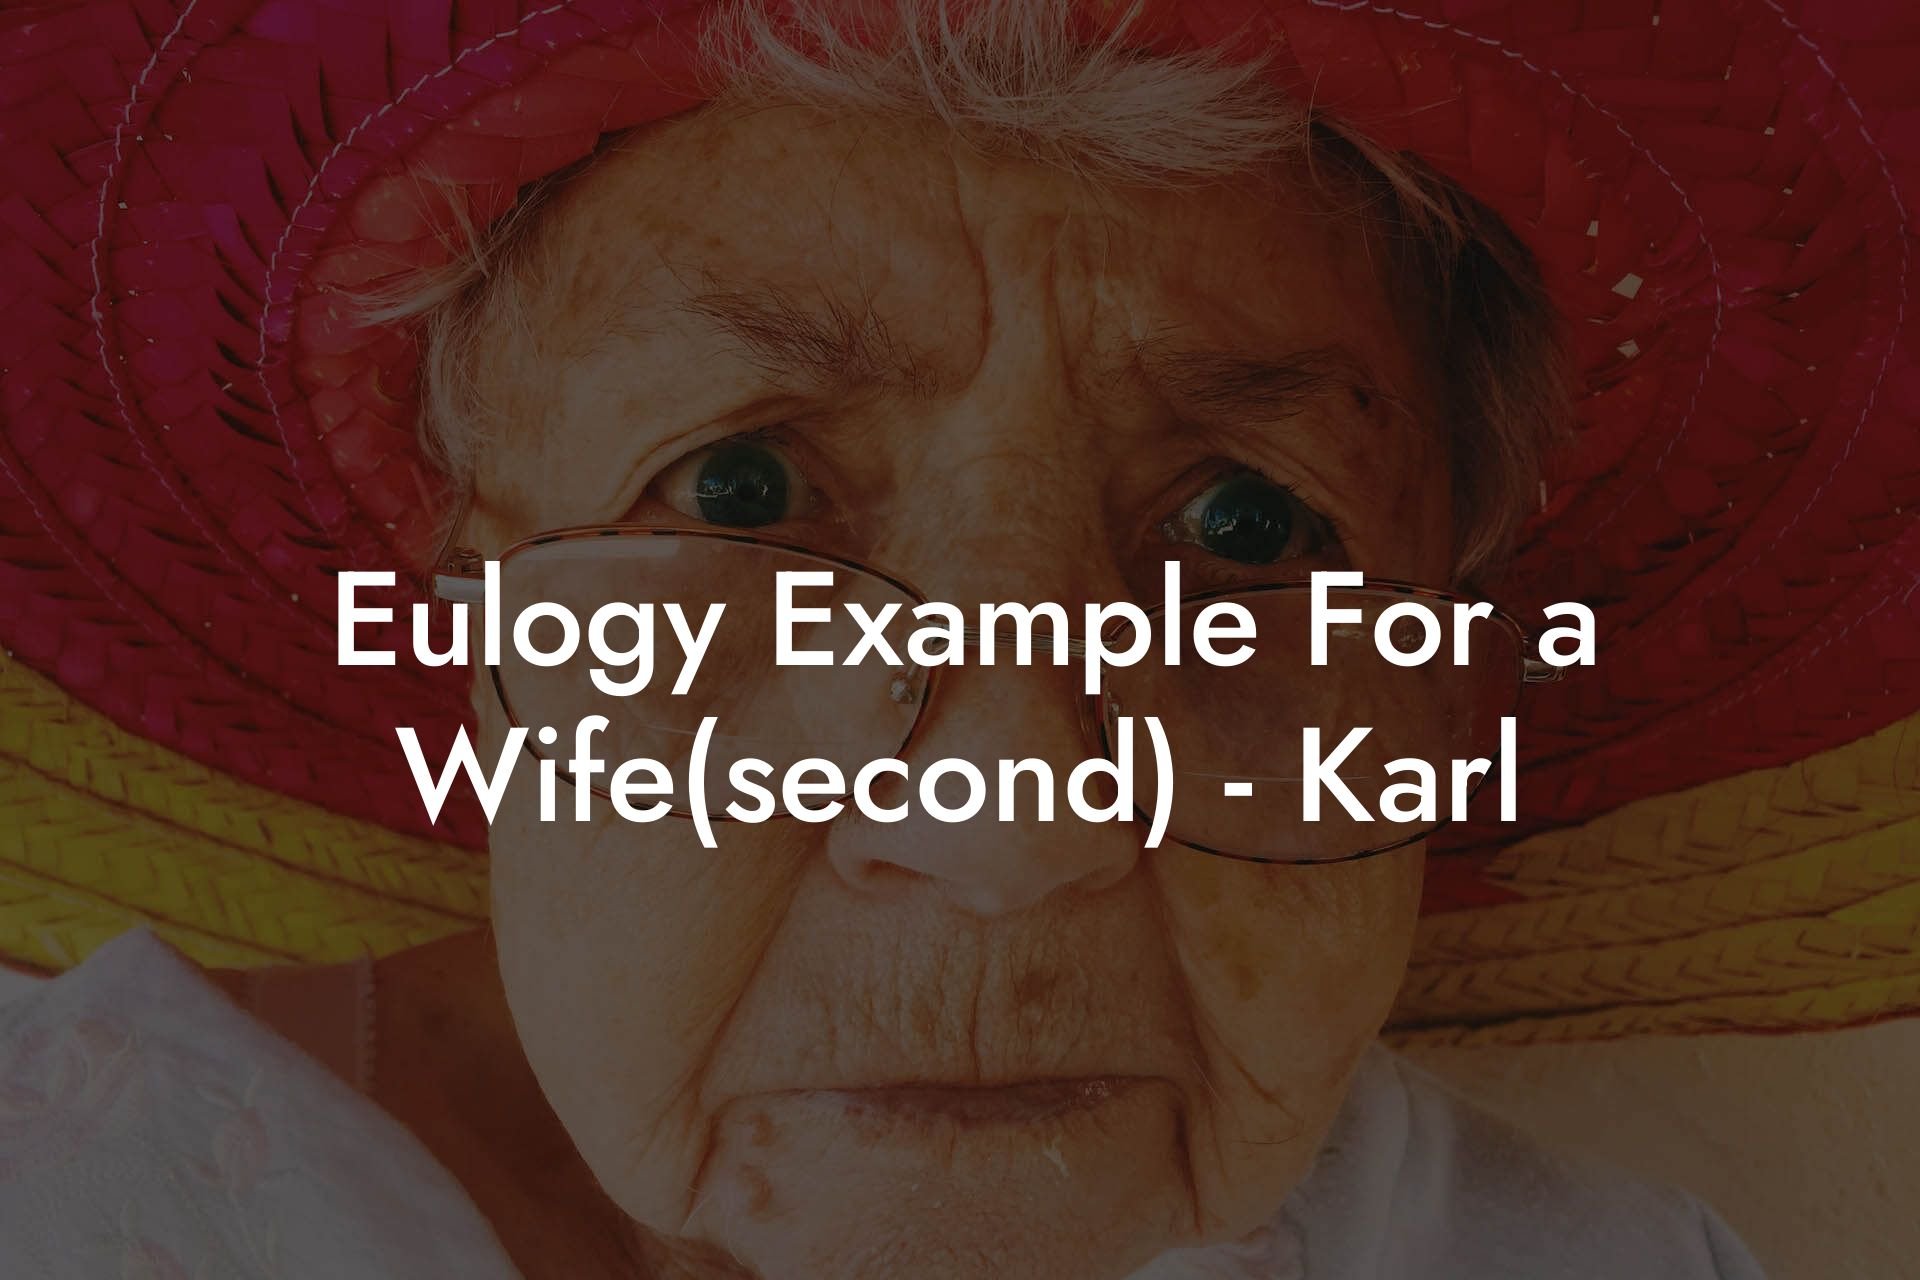 Eulogy Example For a Wife(second)   Karl